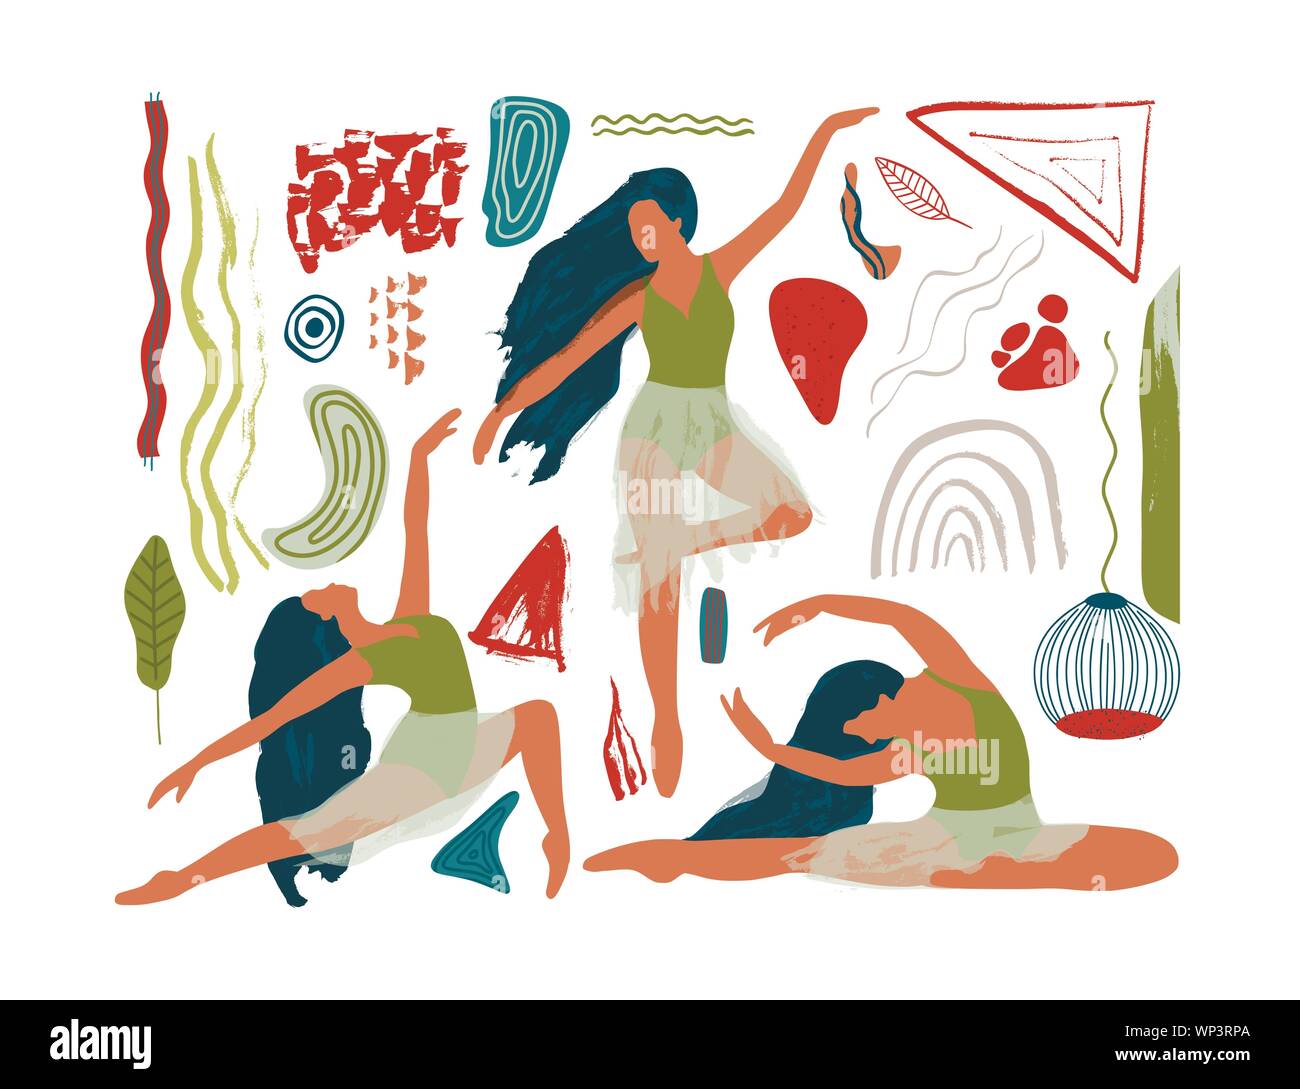 People Sketch Dance High-Res Vector Graphic - Getty Images